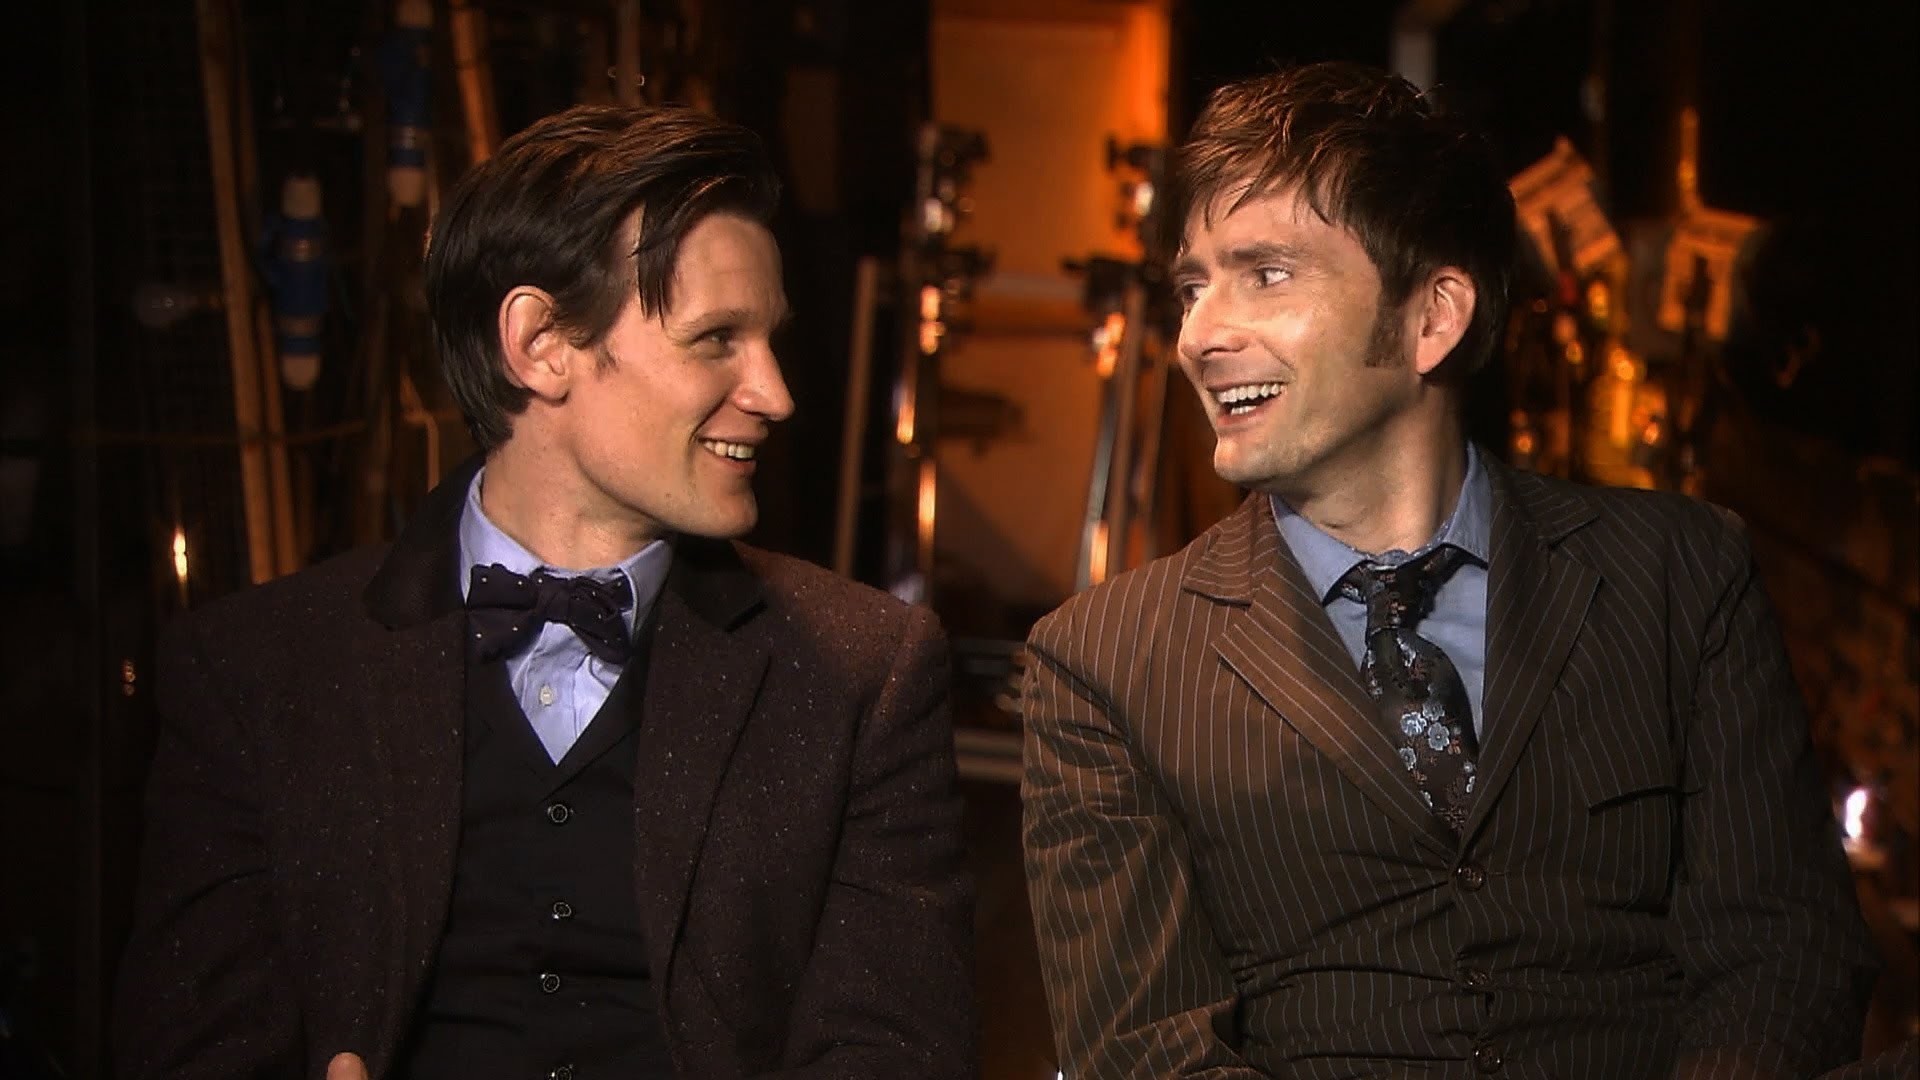 1920x1080 Matt Smith and David Tennant Behind the Scenes of the Doctor Who 50th  Anniversary Special - BBC - YouTube